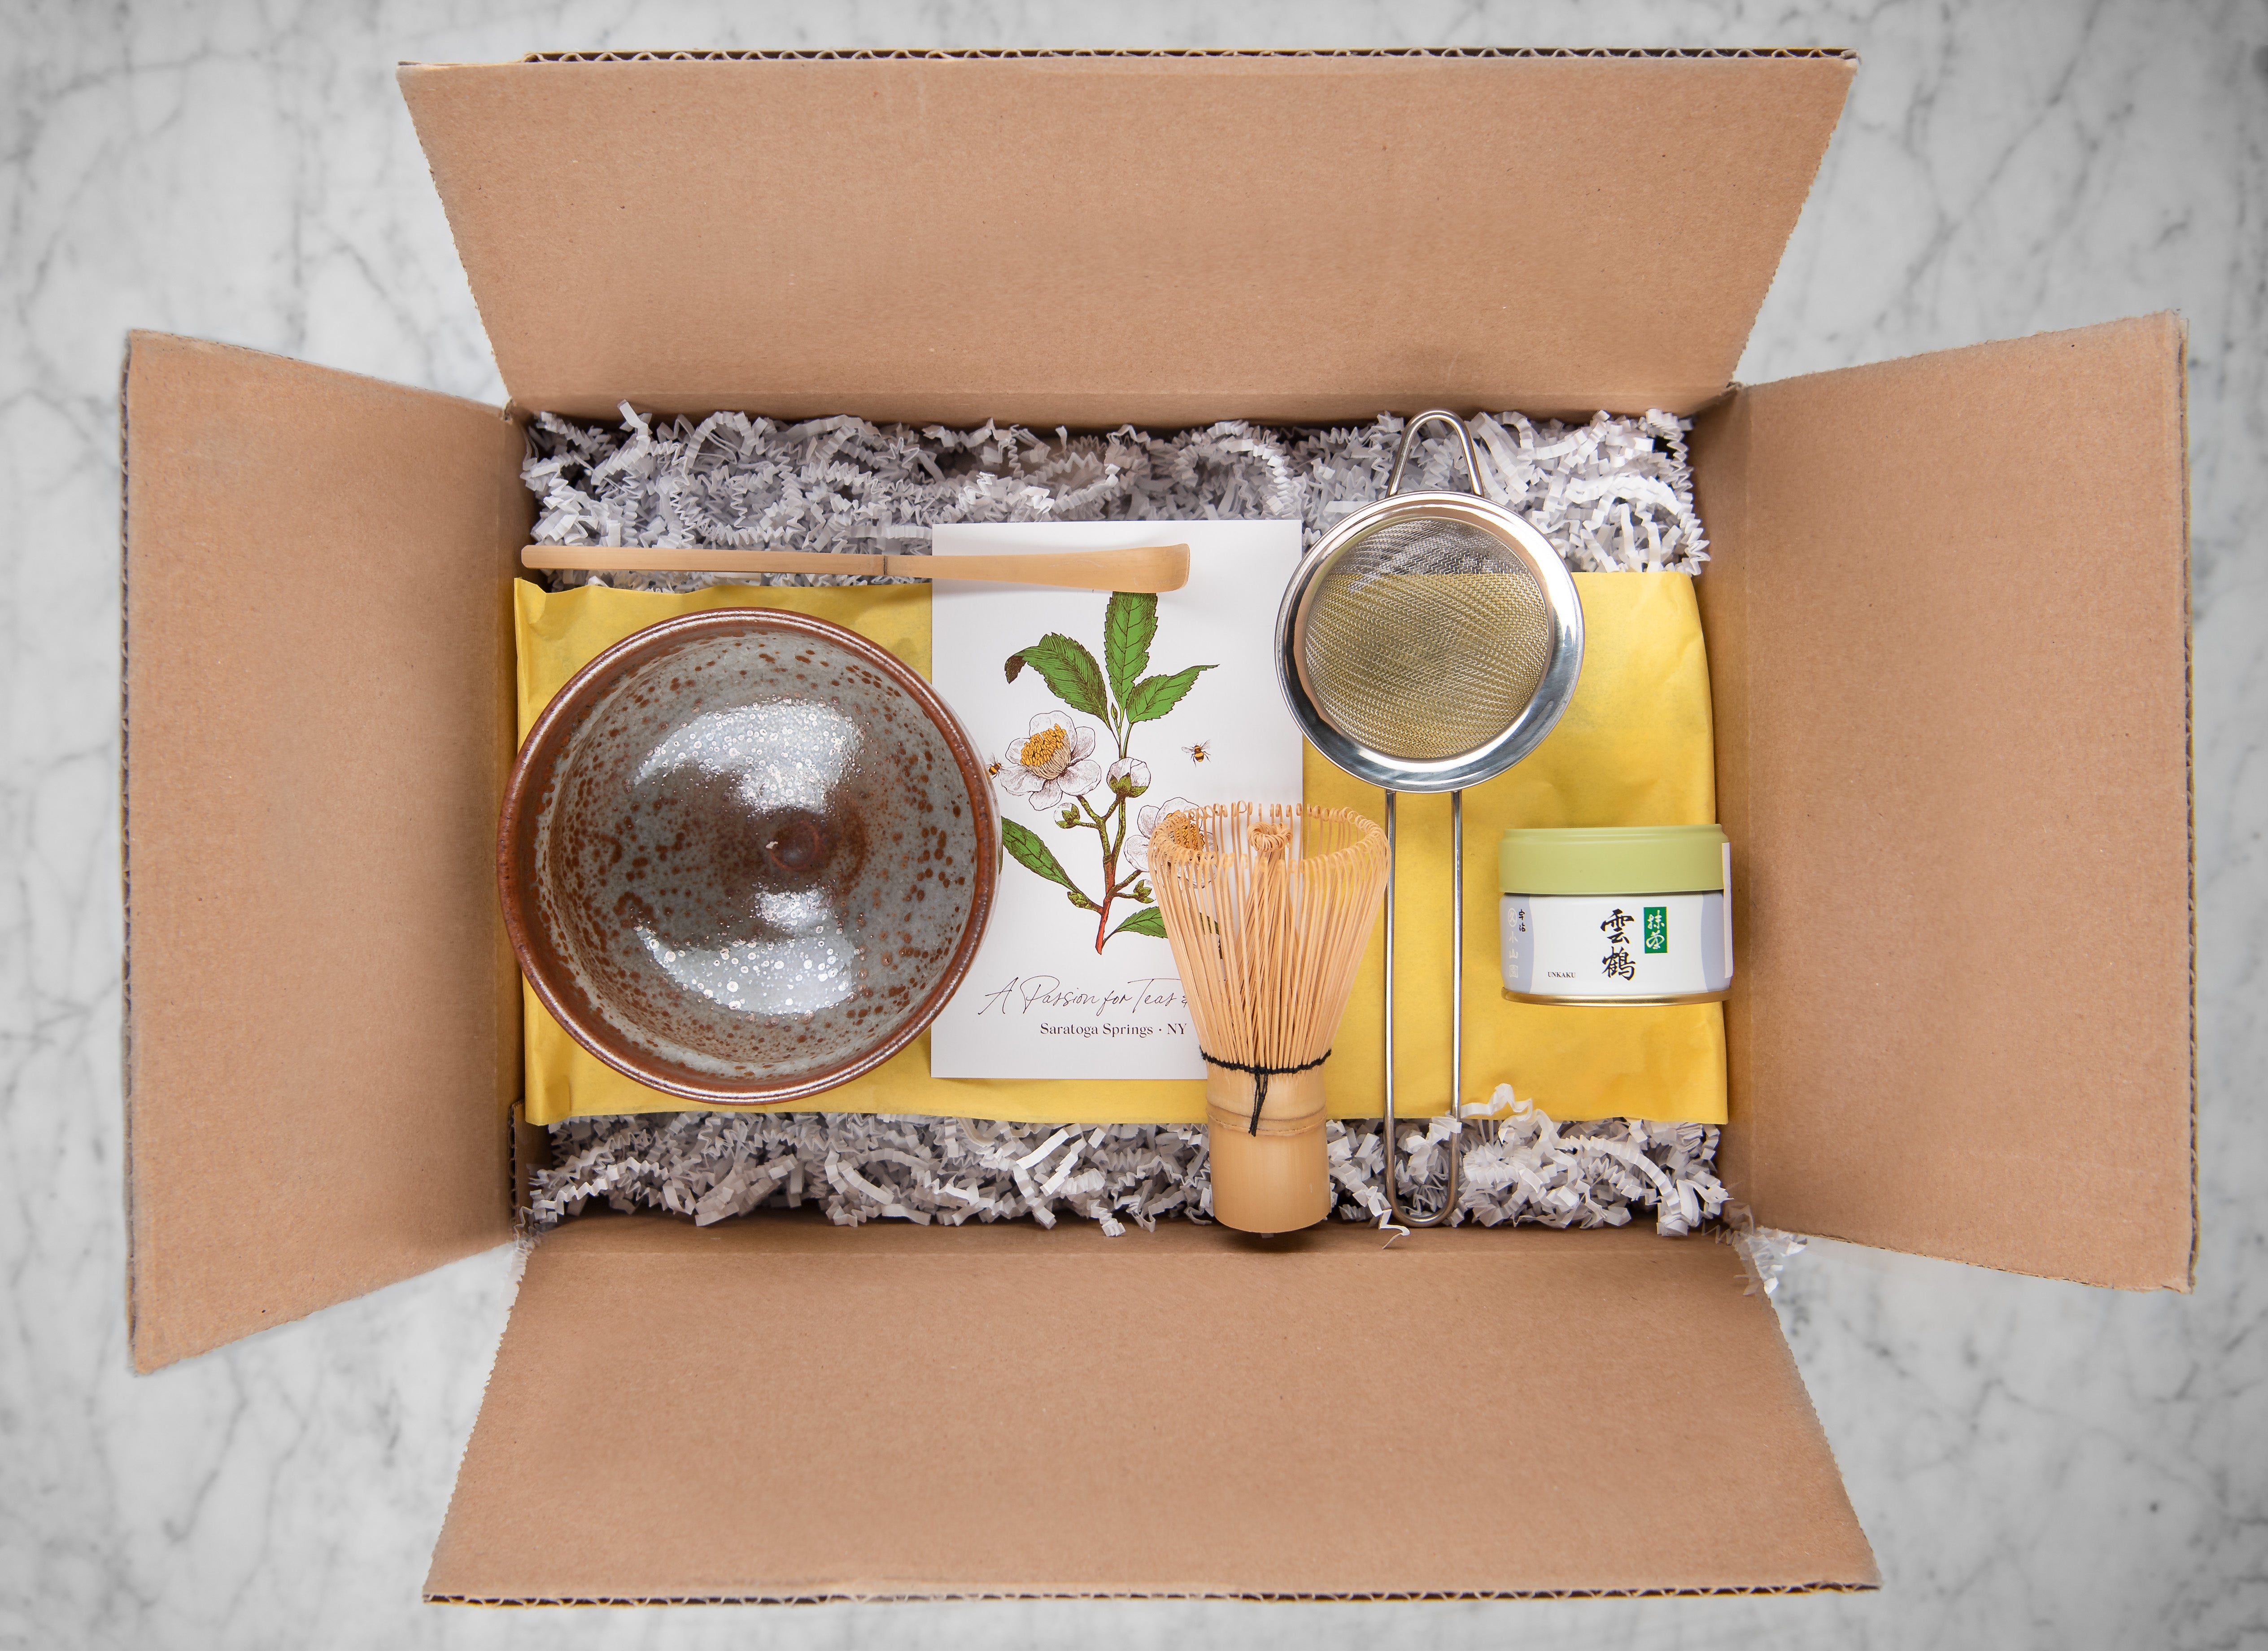 gift box with decorative fill featuring hand-thrown matcha bowl, bamboo matcha scoop, bamboo matcha whisk, stainless steel mesh strainer and usucha grade matcha wako from 8th generation matcha producer